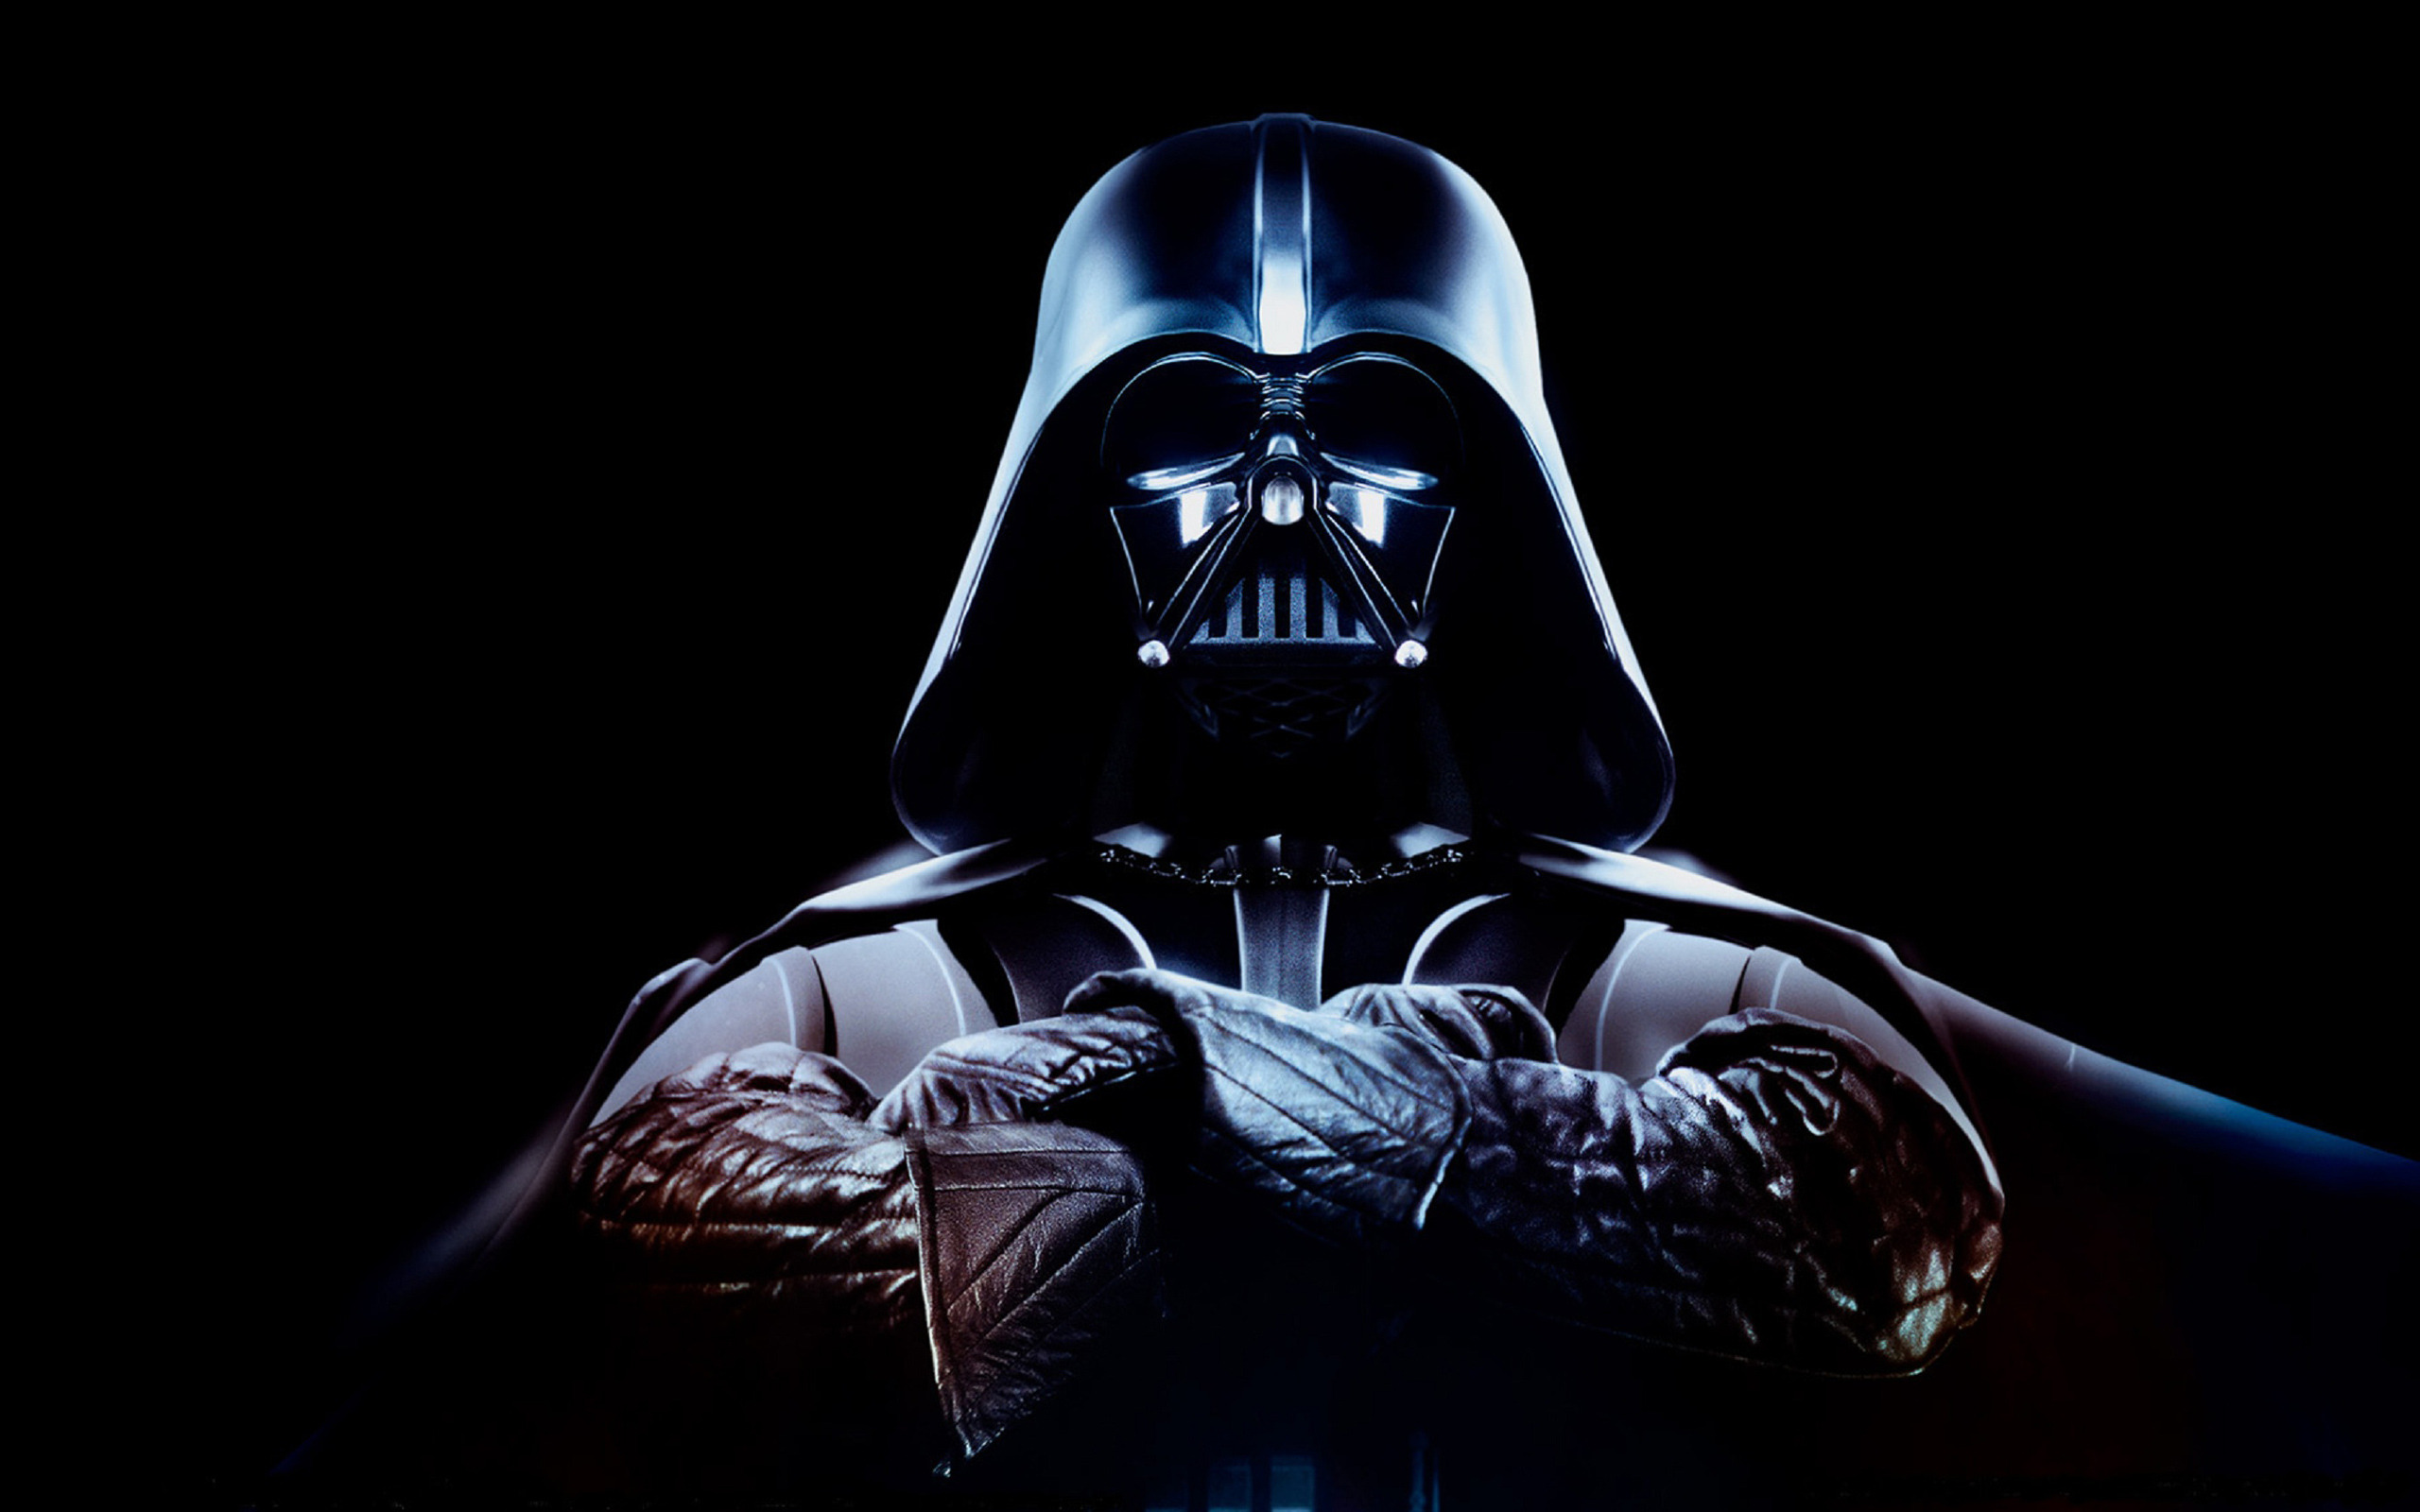 The sound of Darth Vader's labored breathing was achieved using a scuba regulator.